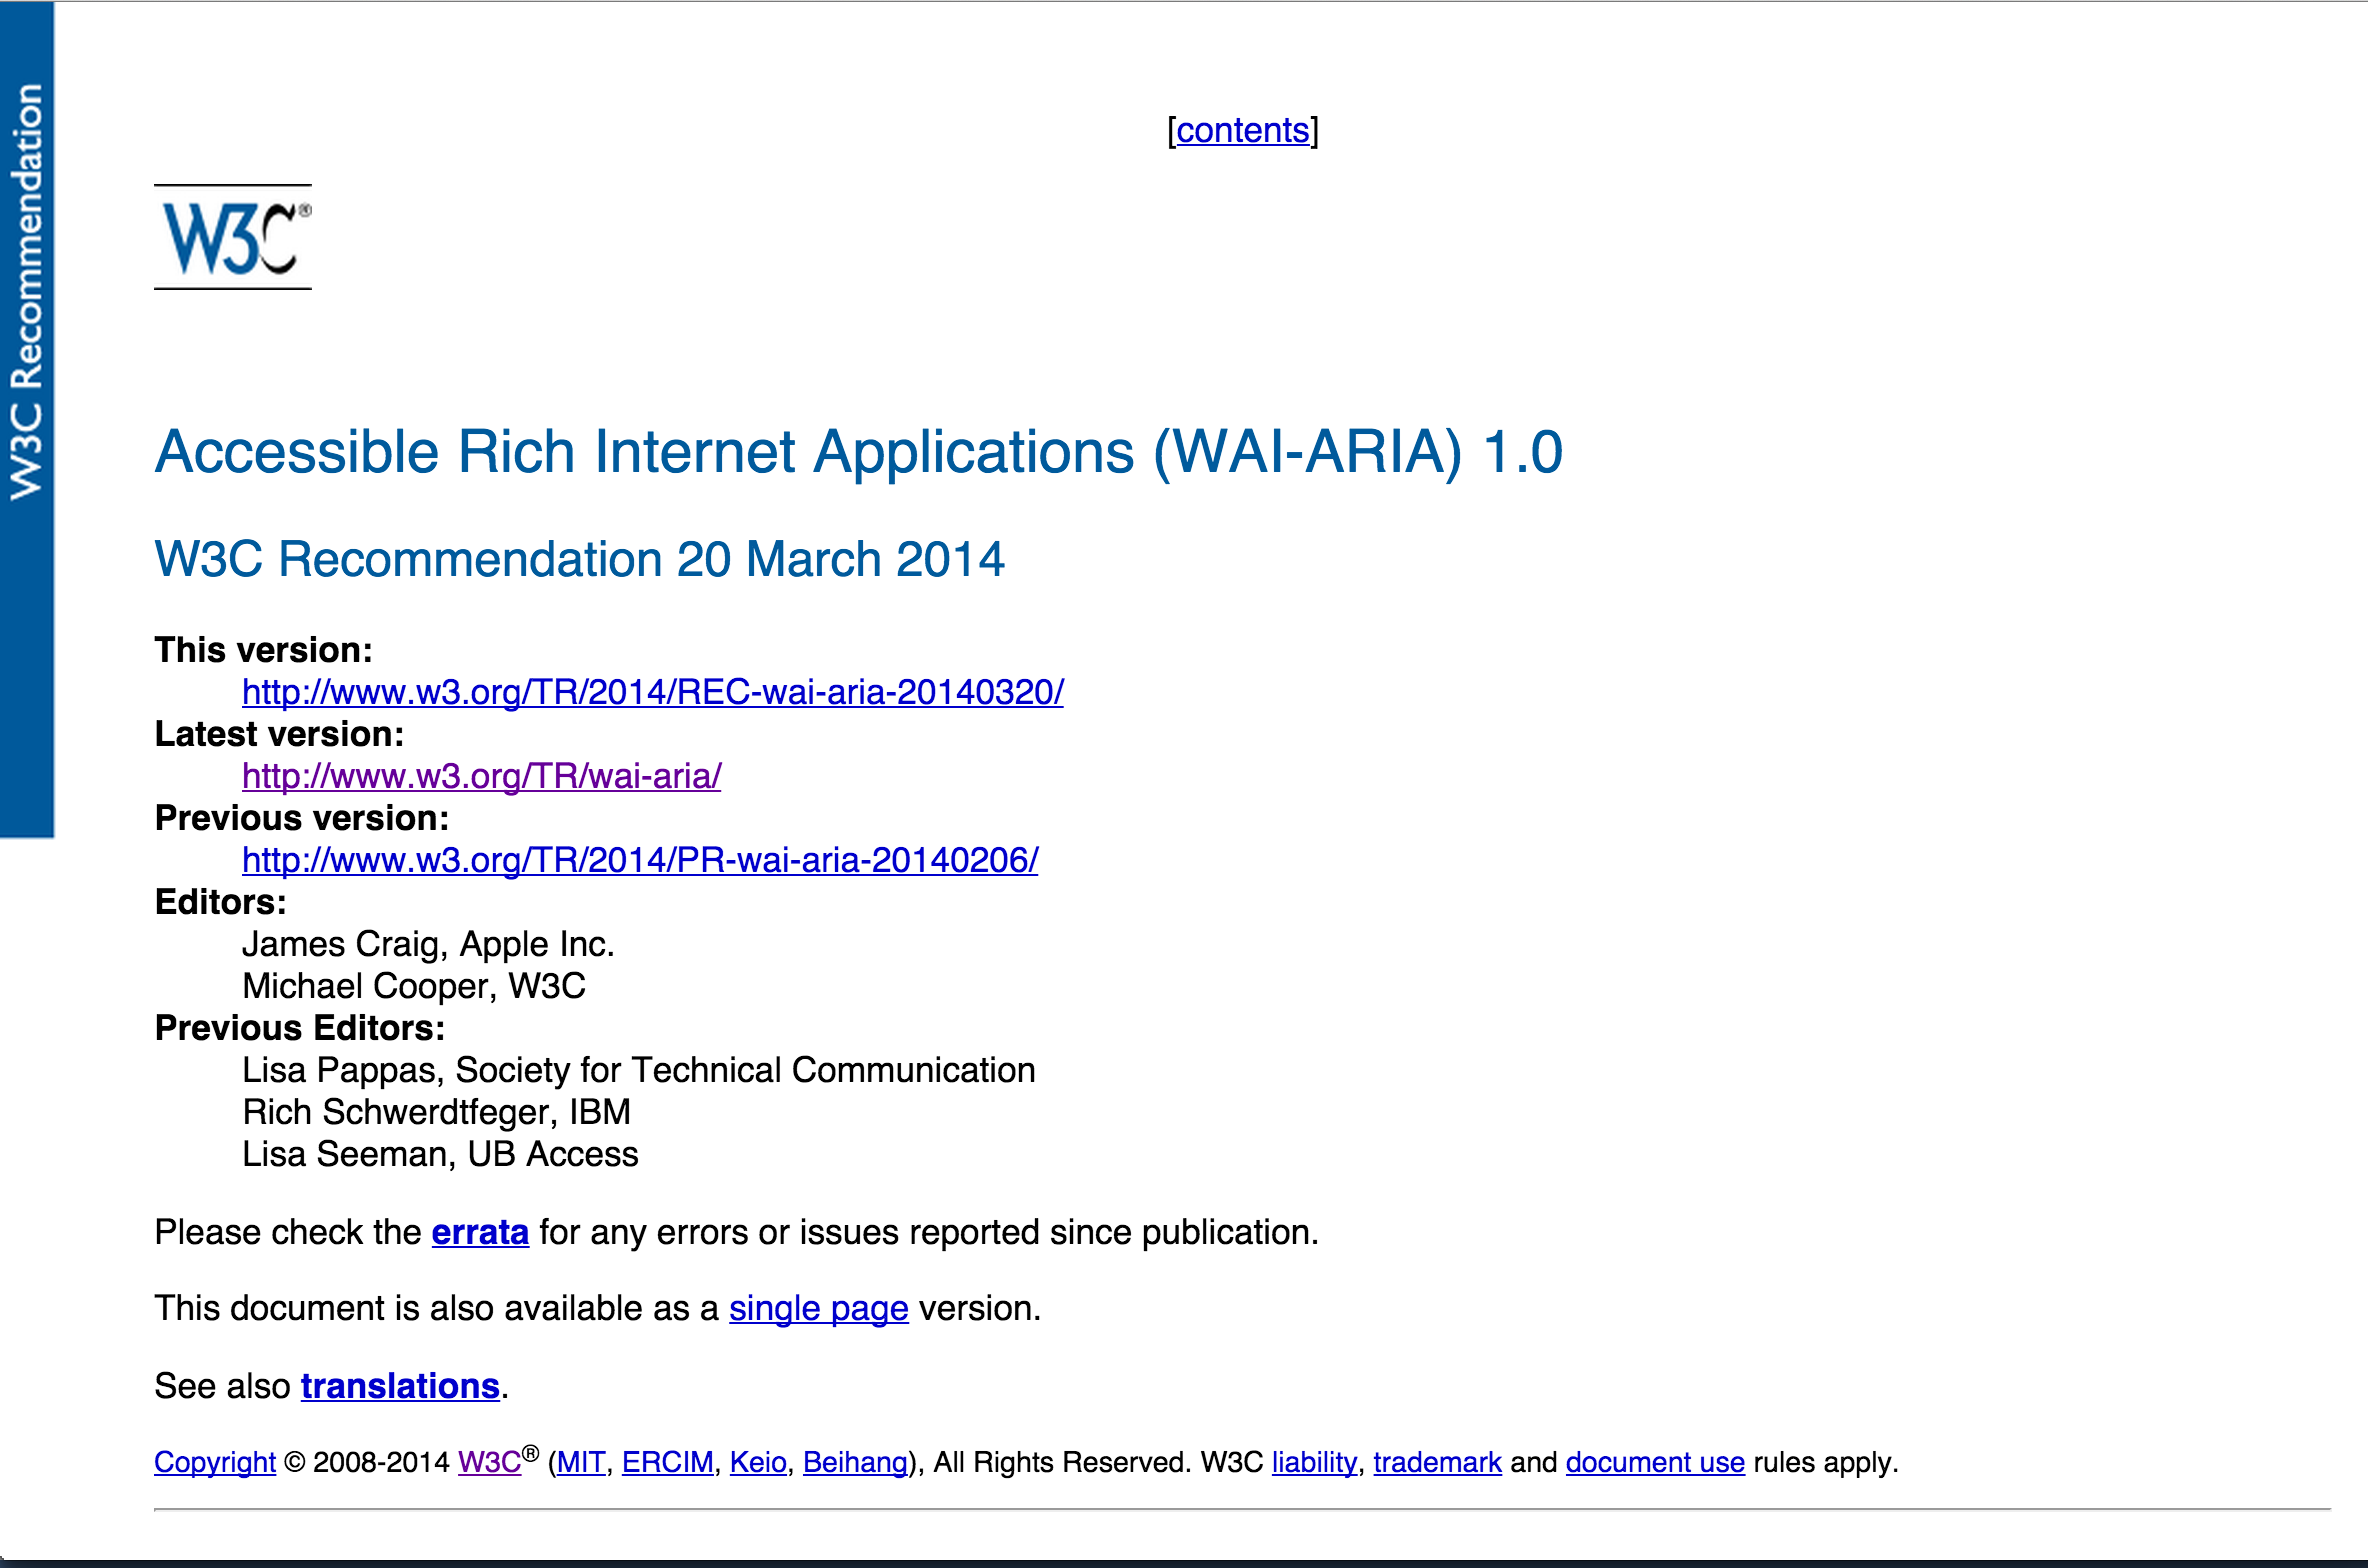 Graphical browser rendering of title portion of W3C ARIA 1.0 Specfication